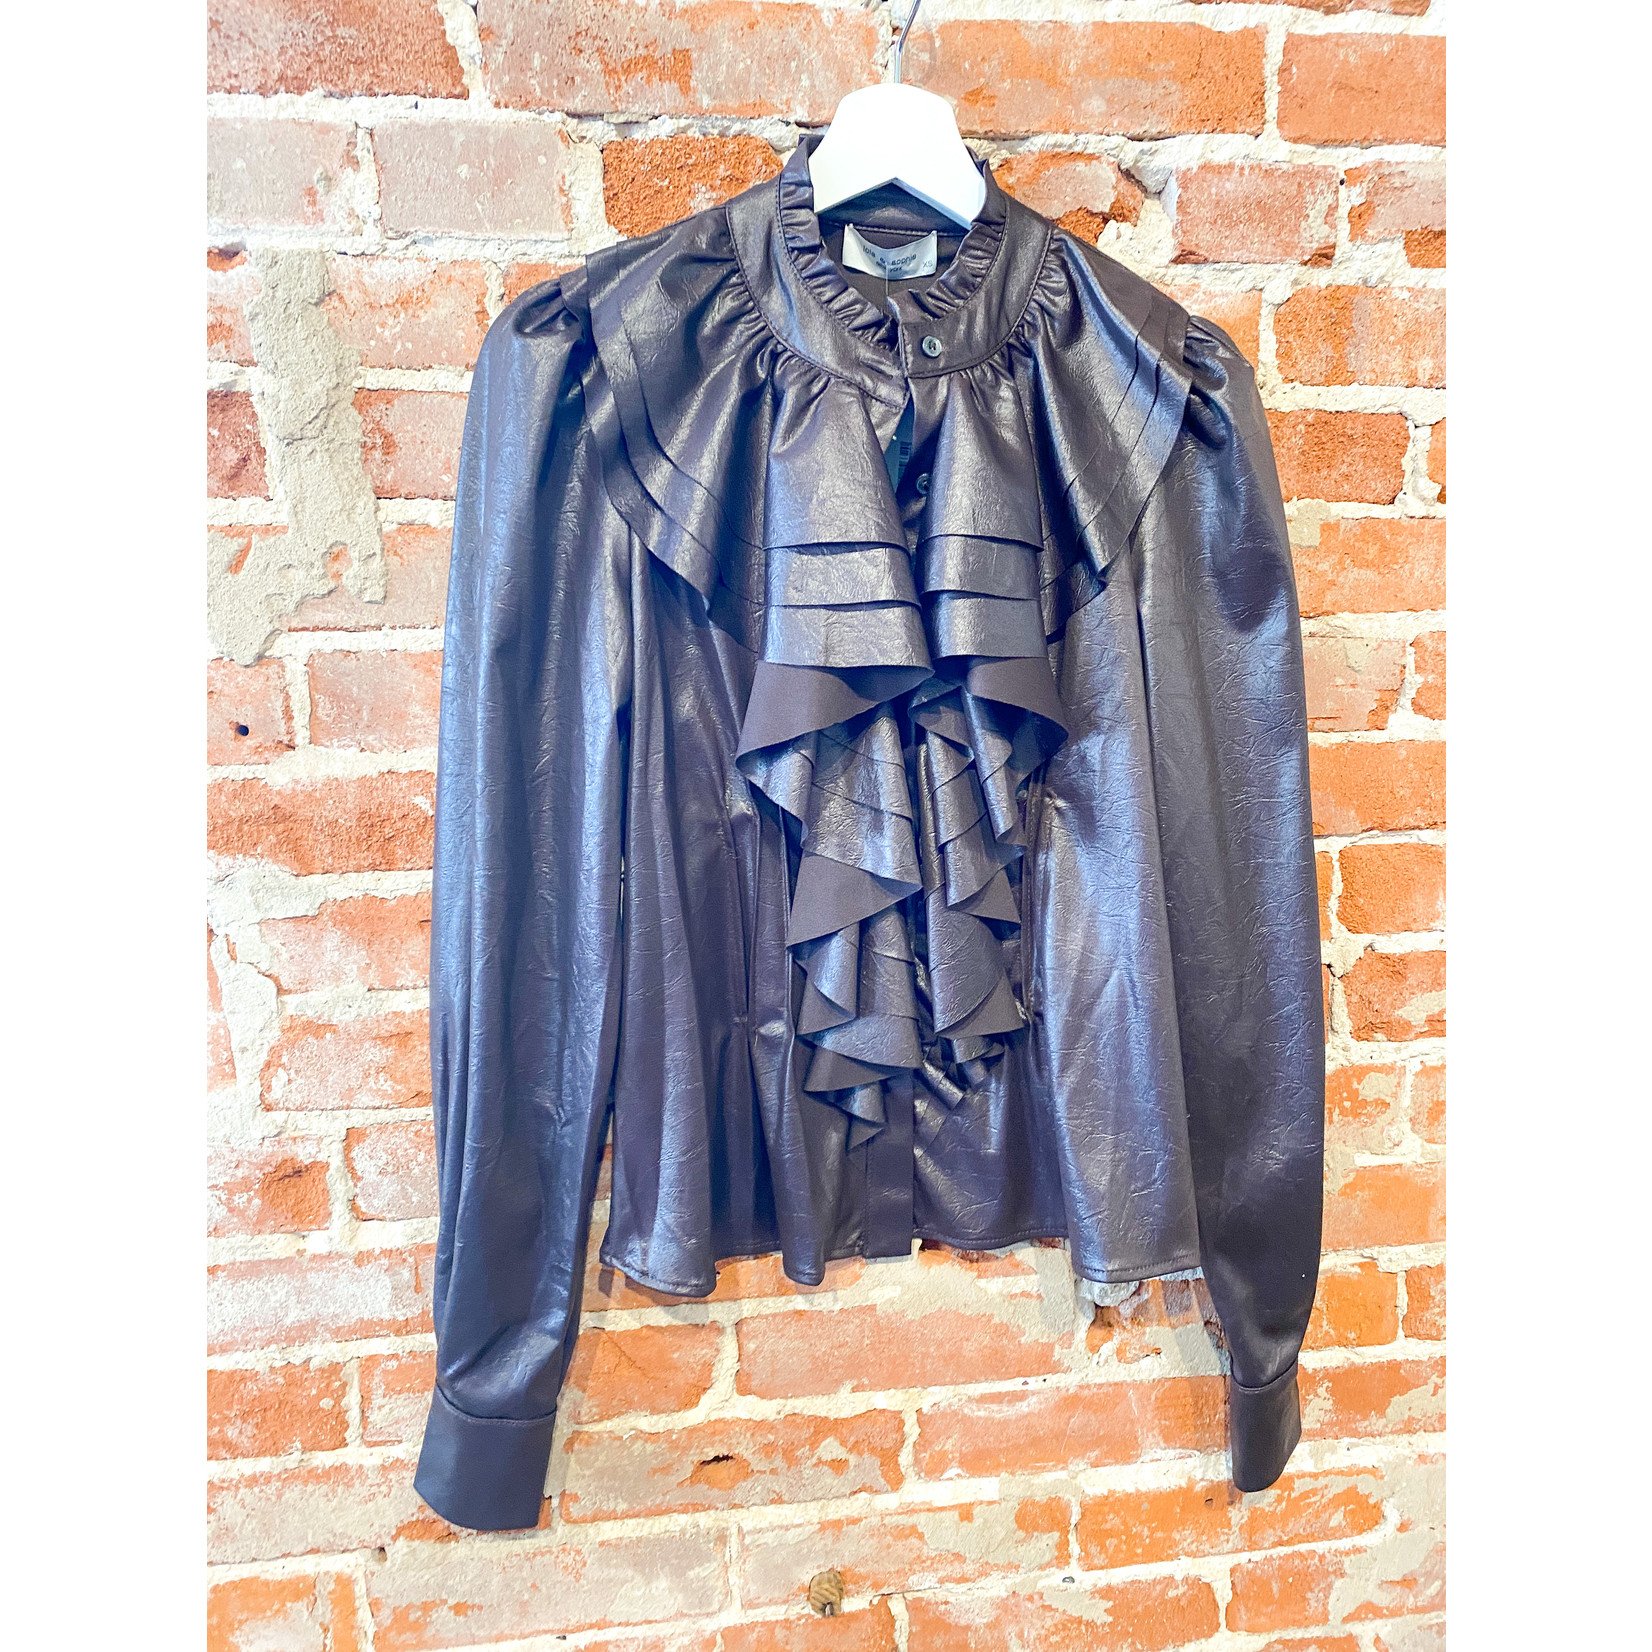 Lola & Sophie Leather Jersey Ruffle Button Down